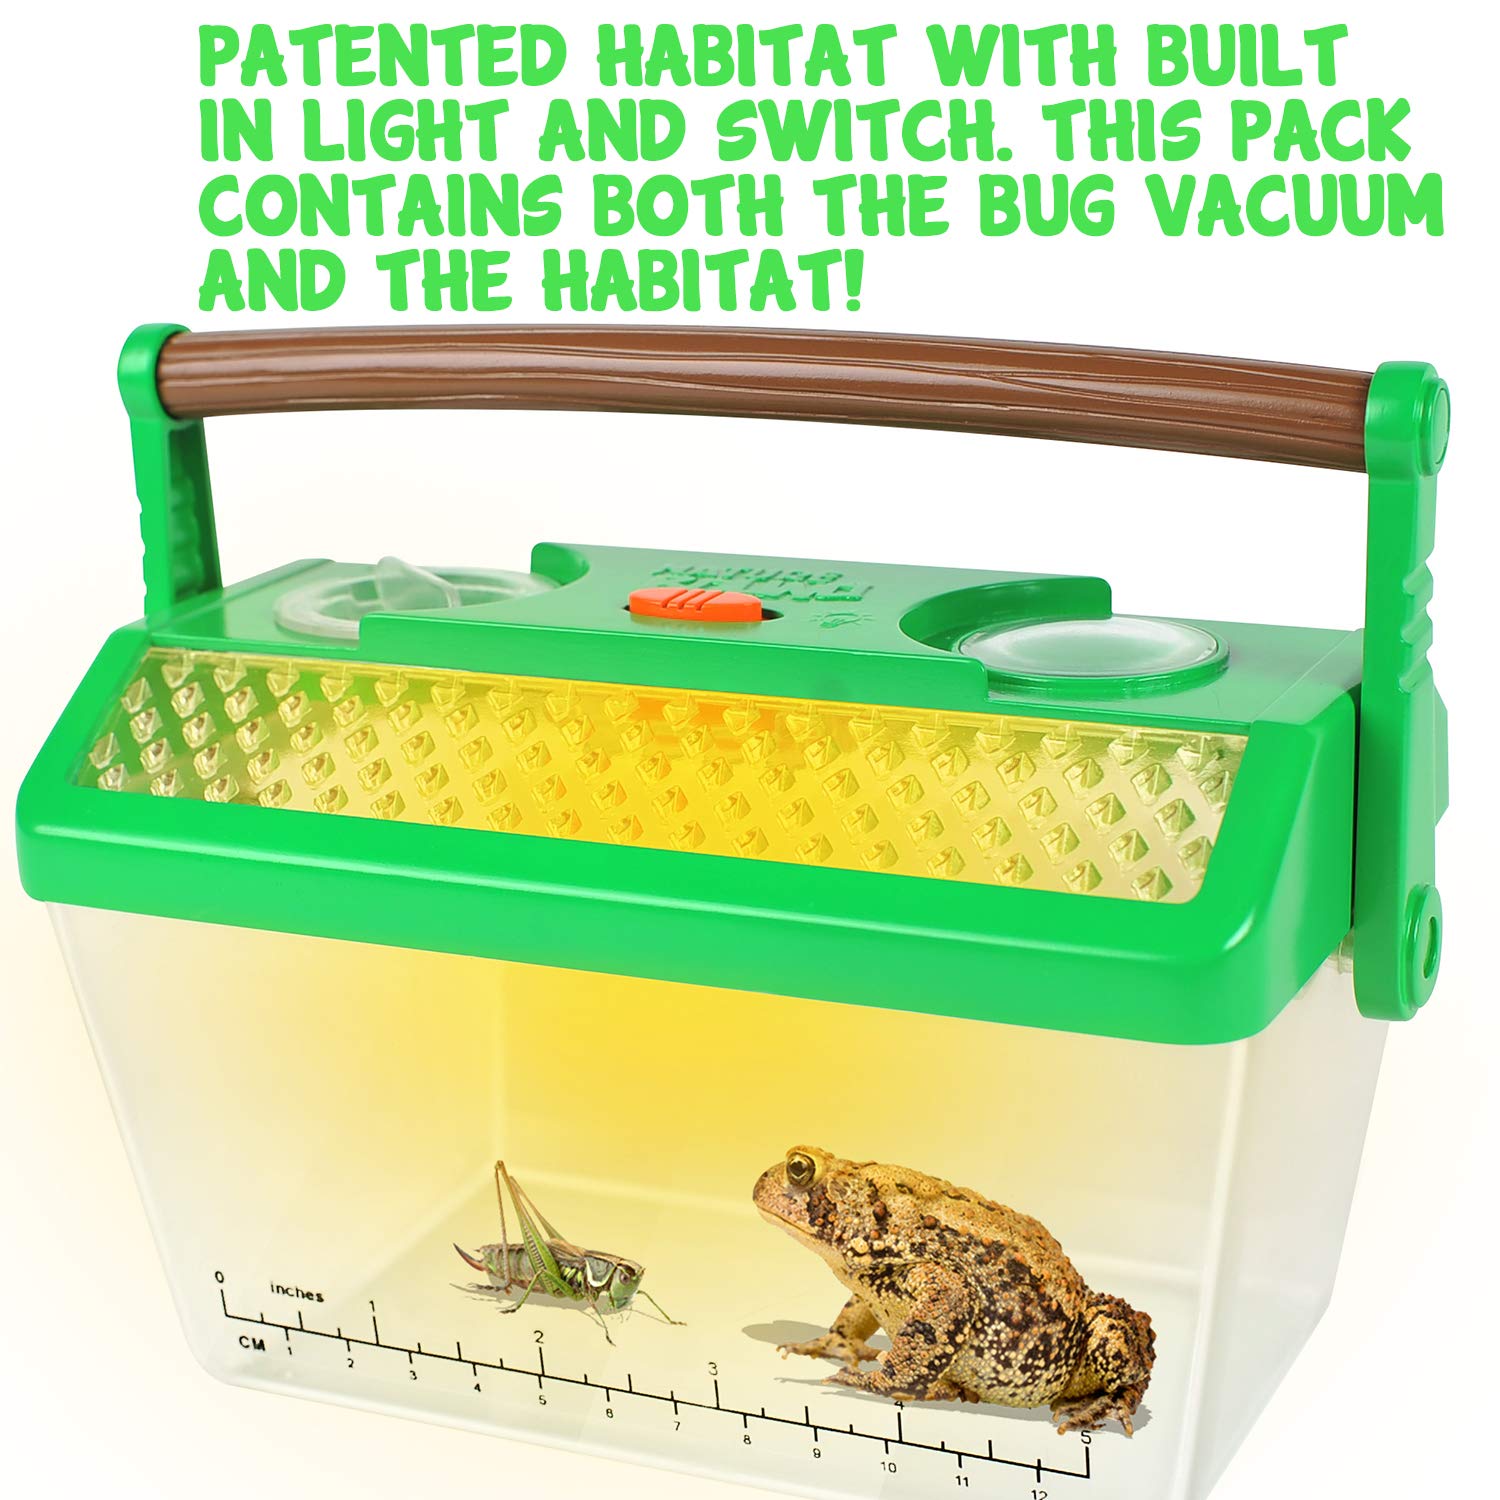 Nature Bound Bug Catcher Vacuum with Light Up Critter Habitat Case for Backyard Exploration - Complete Kit for Kids Includes Vacuum and Cage, Green